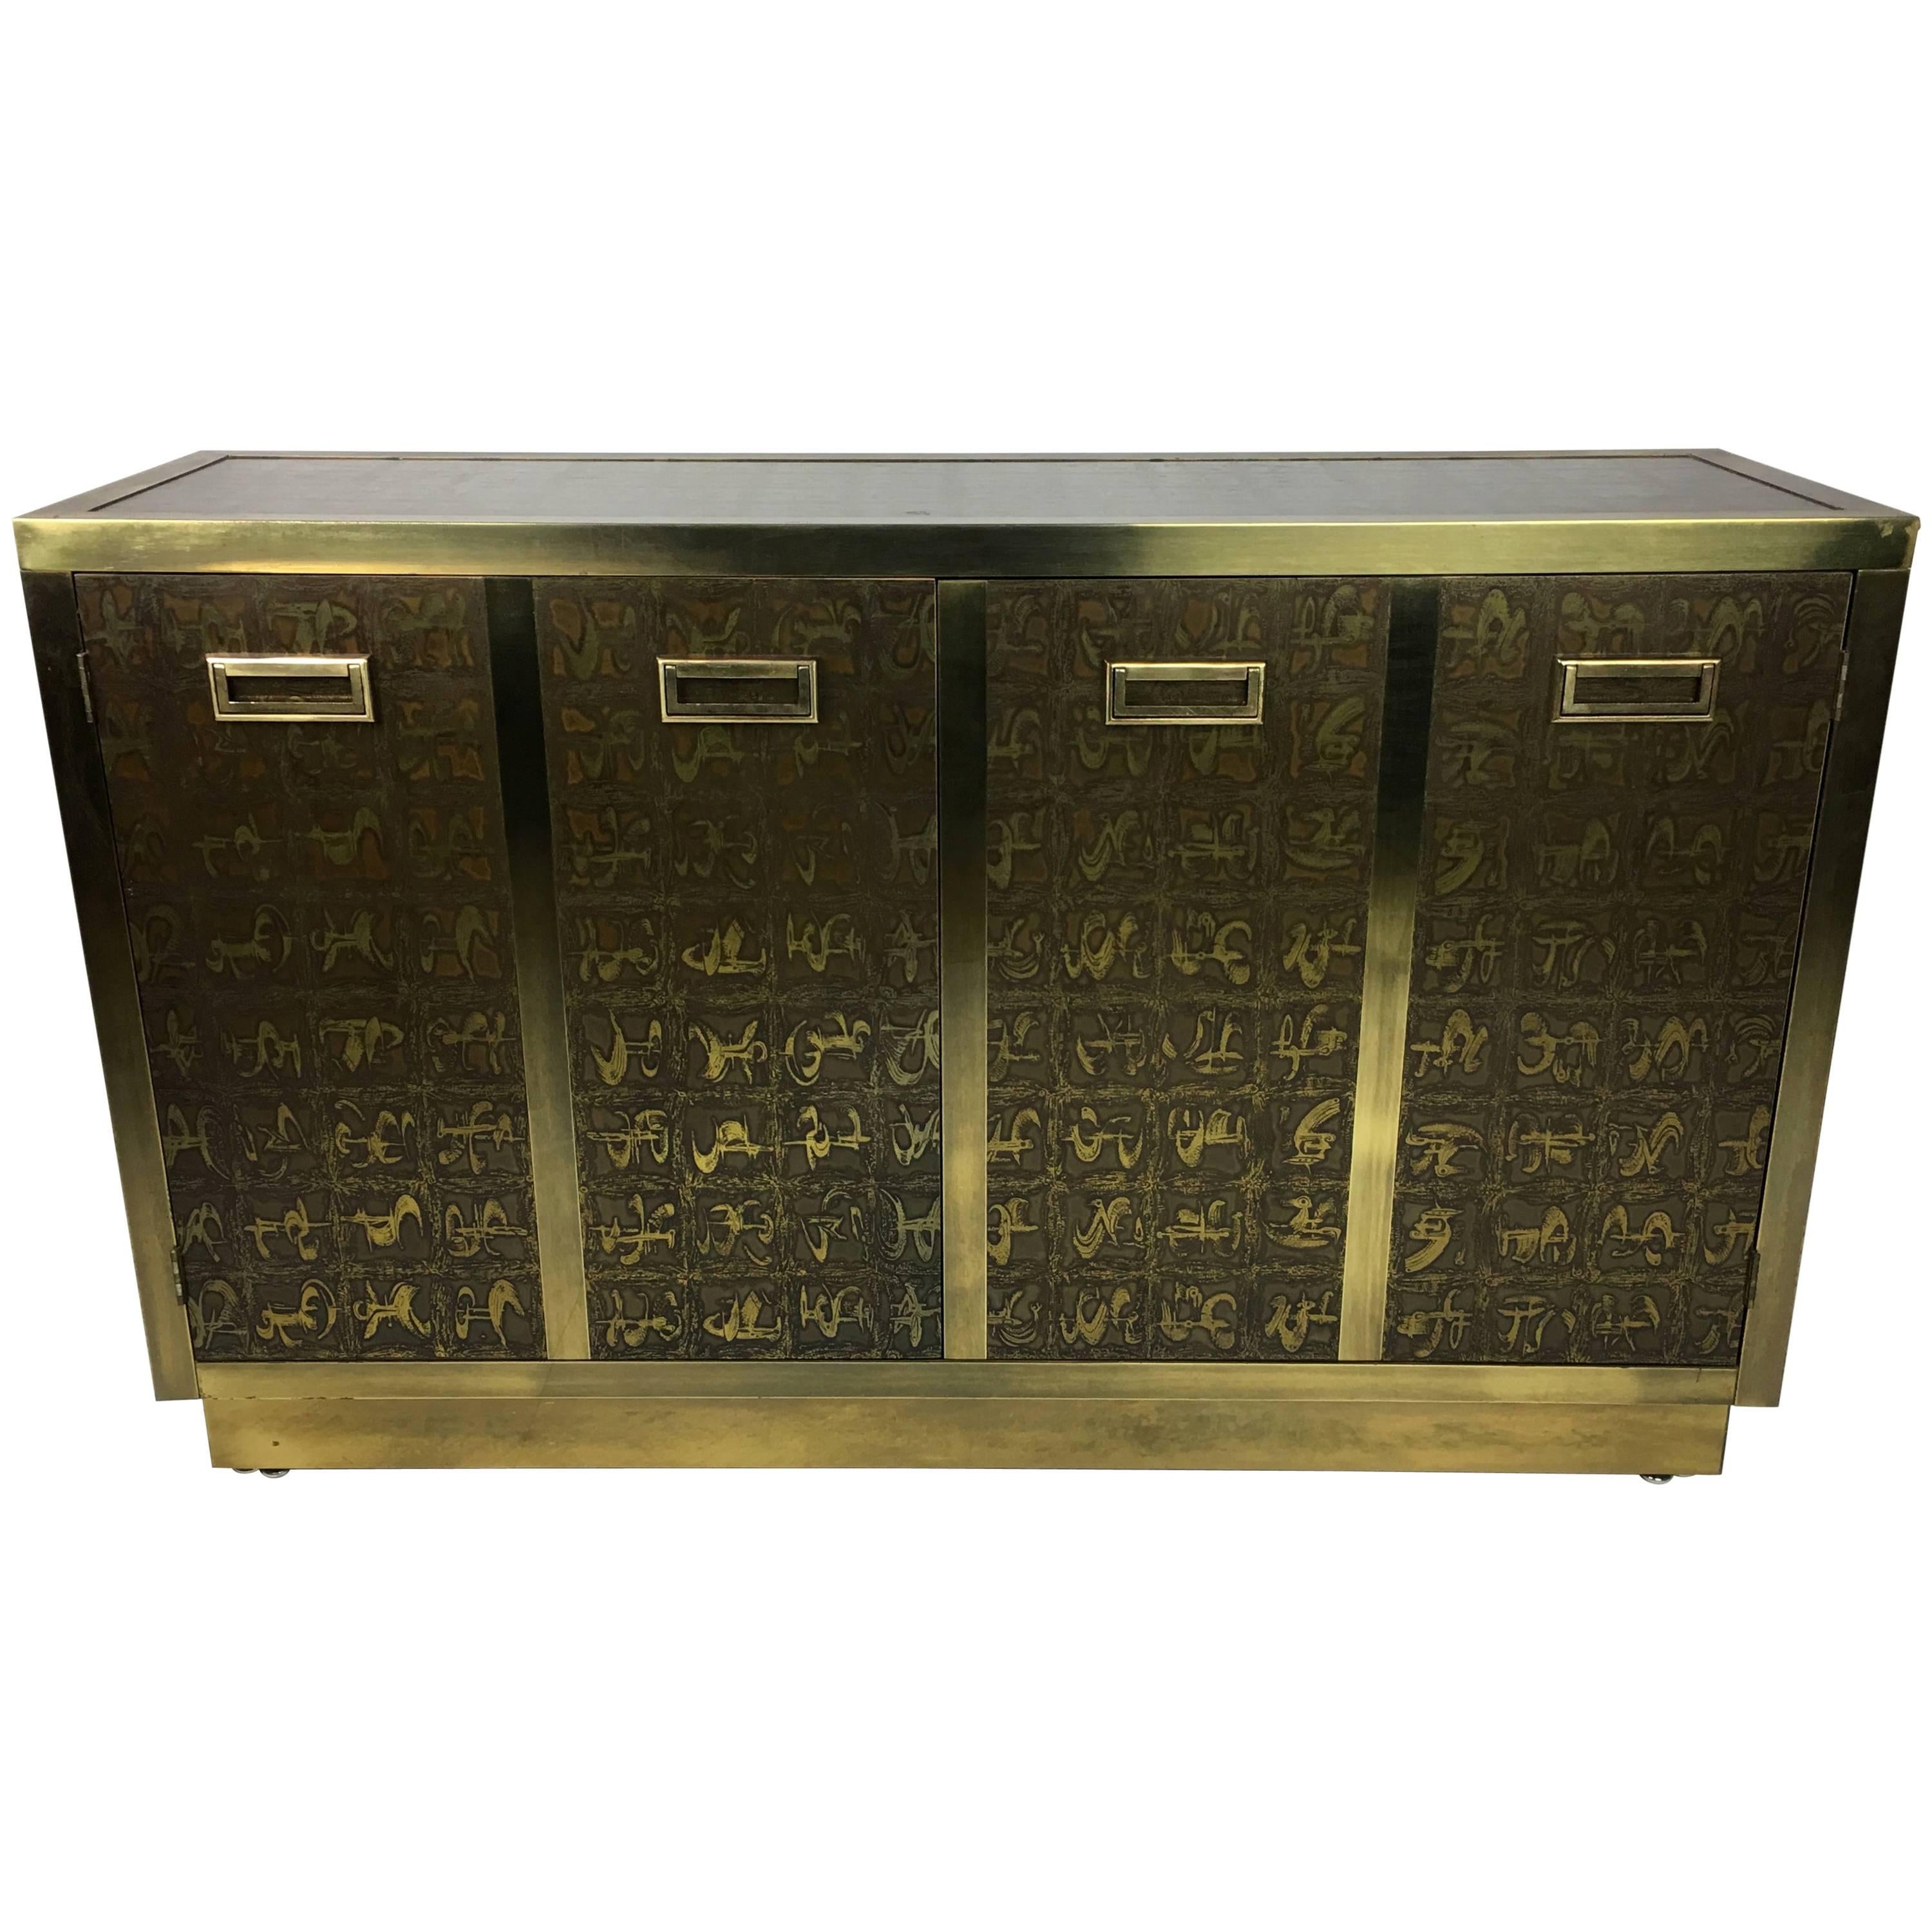 Rare brass clad two-door cabinet decorated with etched abstract figures by Bernard Rohne for Mastercraft. The etched design is featured on three sides and the top of the cabinet. This versatile statement piece would make an excellent Buffet,